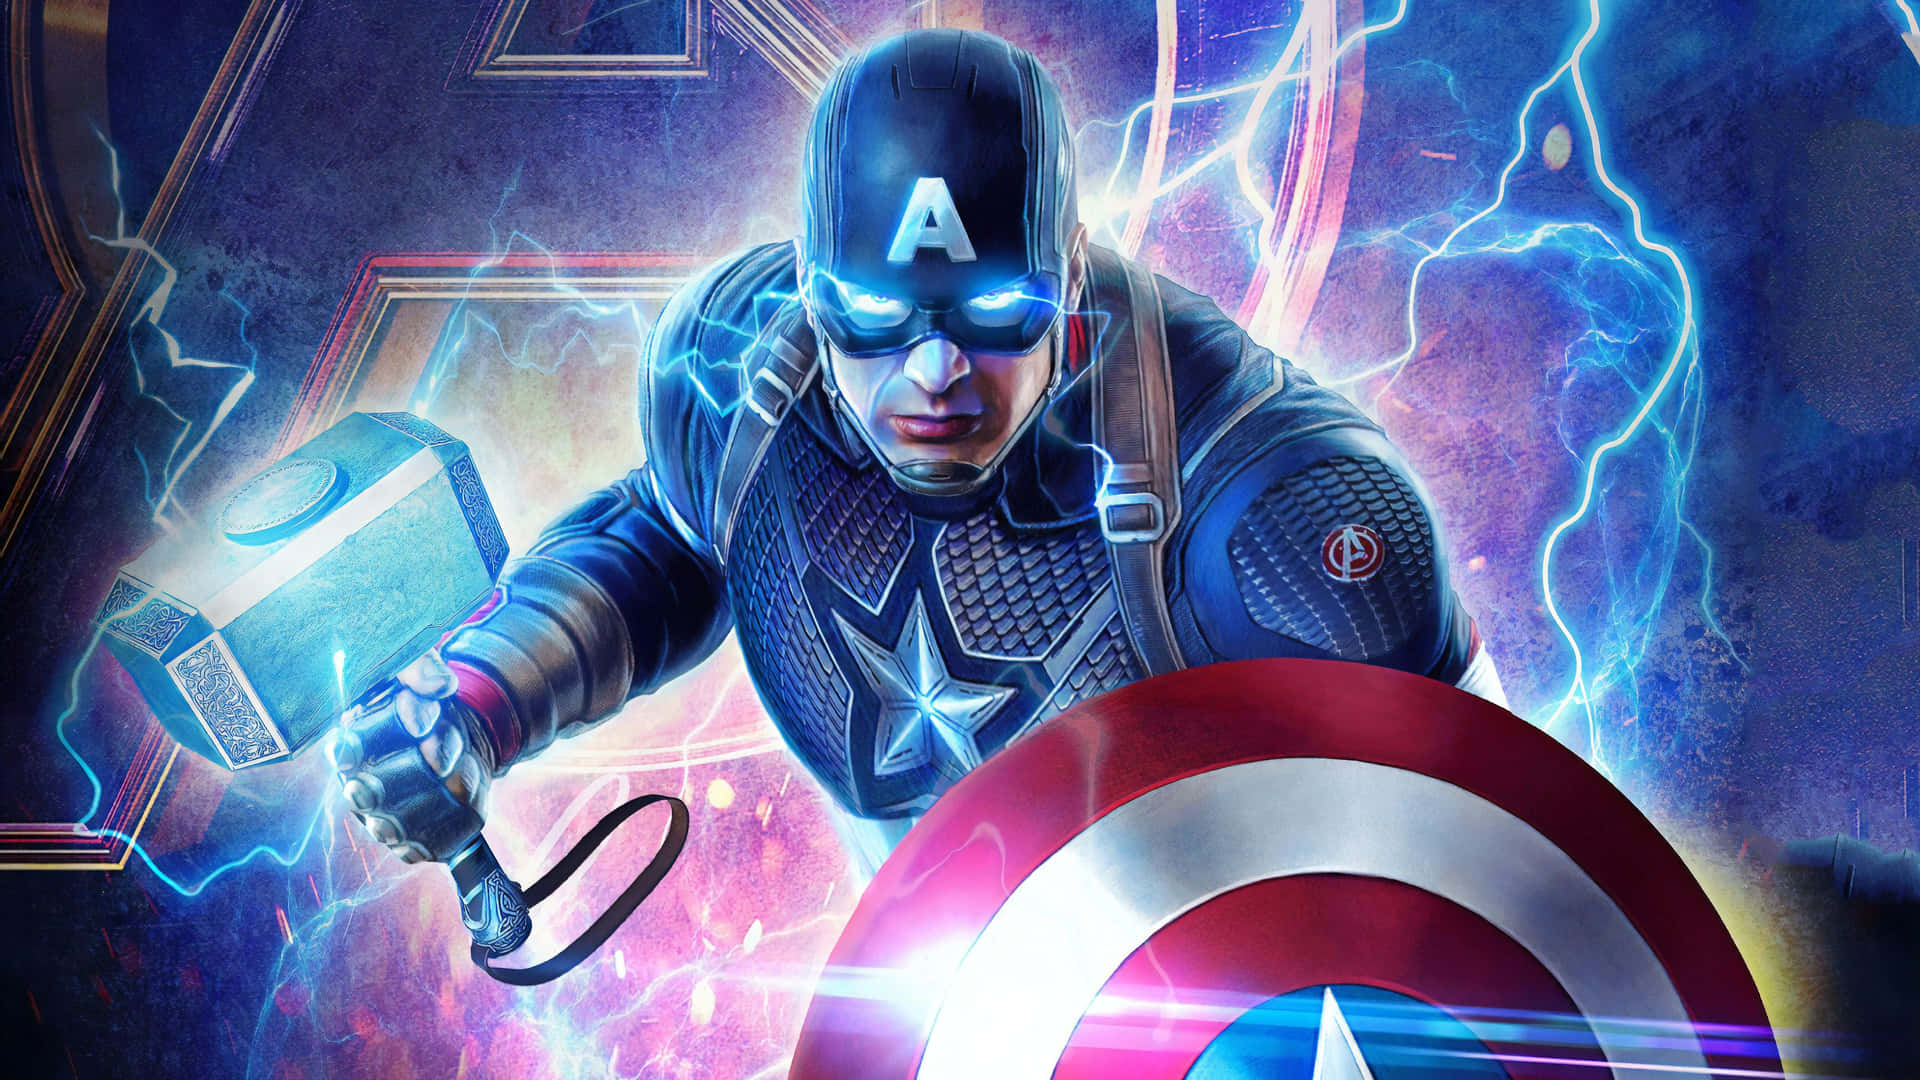 Justice For All - Captain America uses his shield to save the world in Endgame. Wallpaper